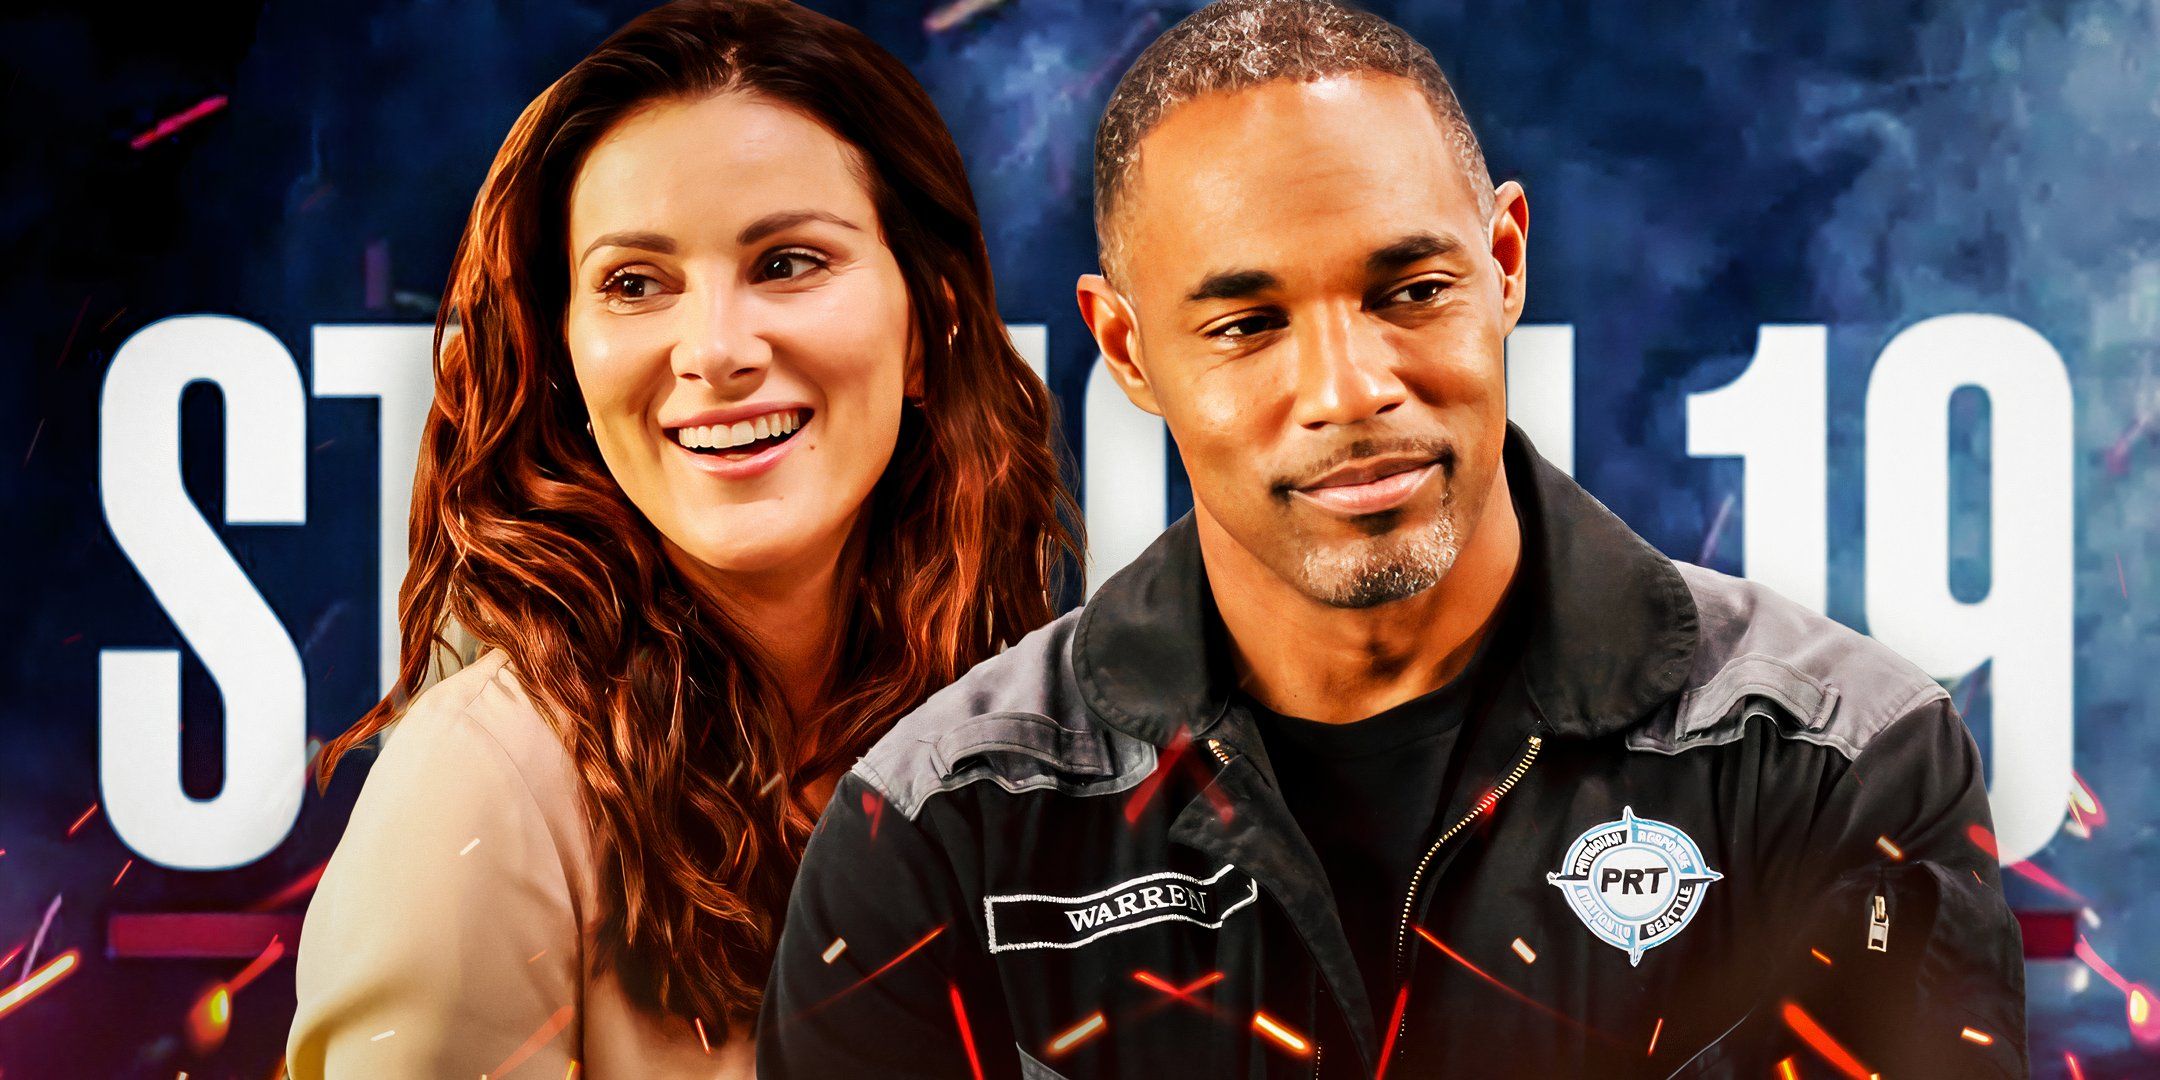 Jason George as Dr. Ben Warren looking content and Stefania Spampinato as Dr. Carina DeLuca smiling in Station 19